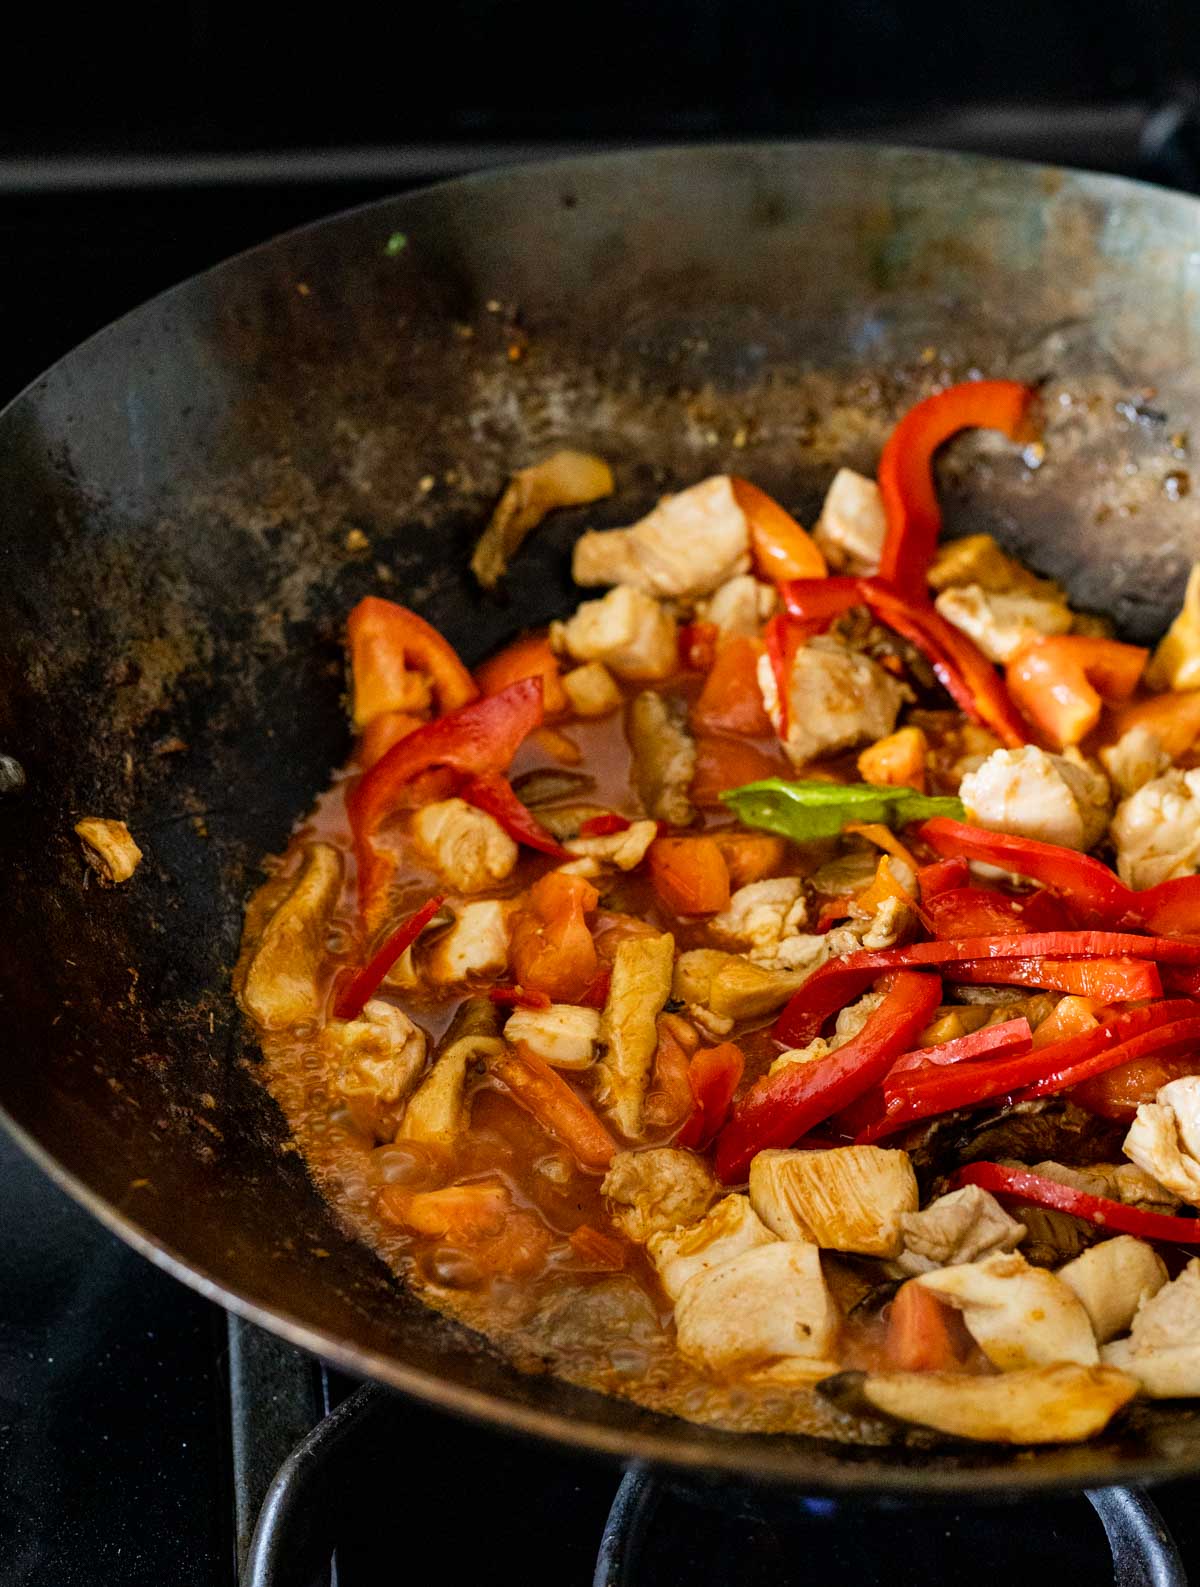 Vegetables and chicken cooking in tom yum sauce in a wok on the stovetop.